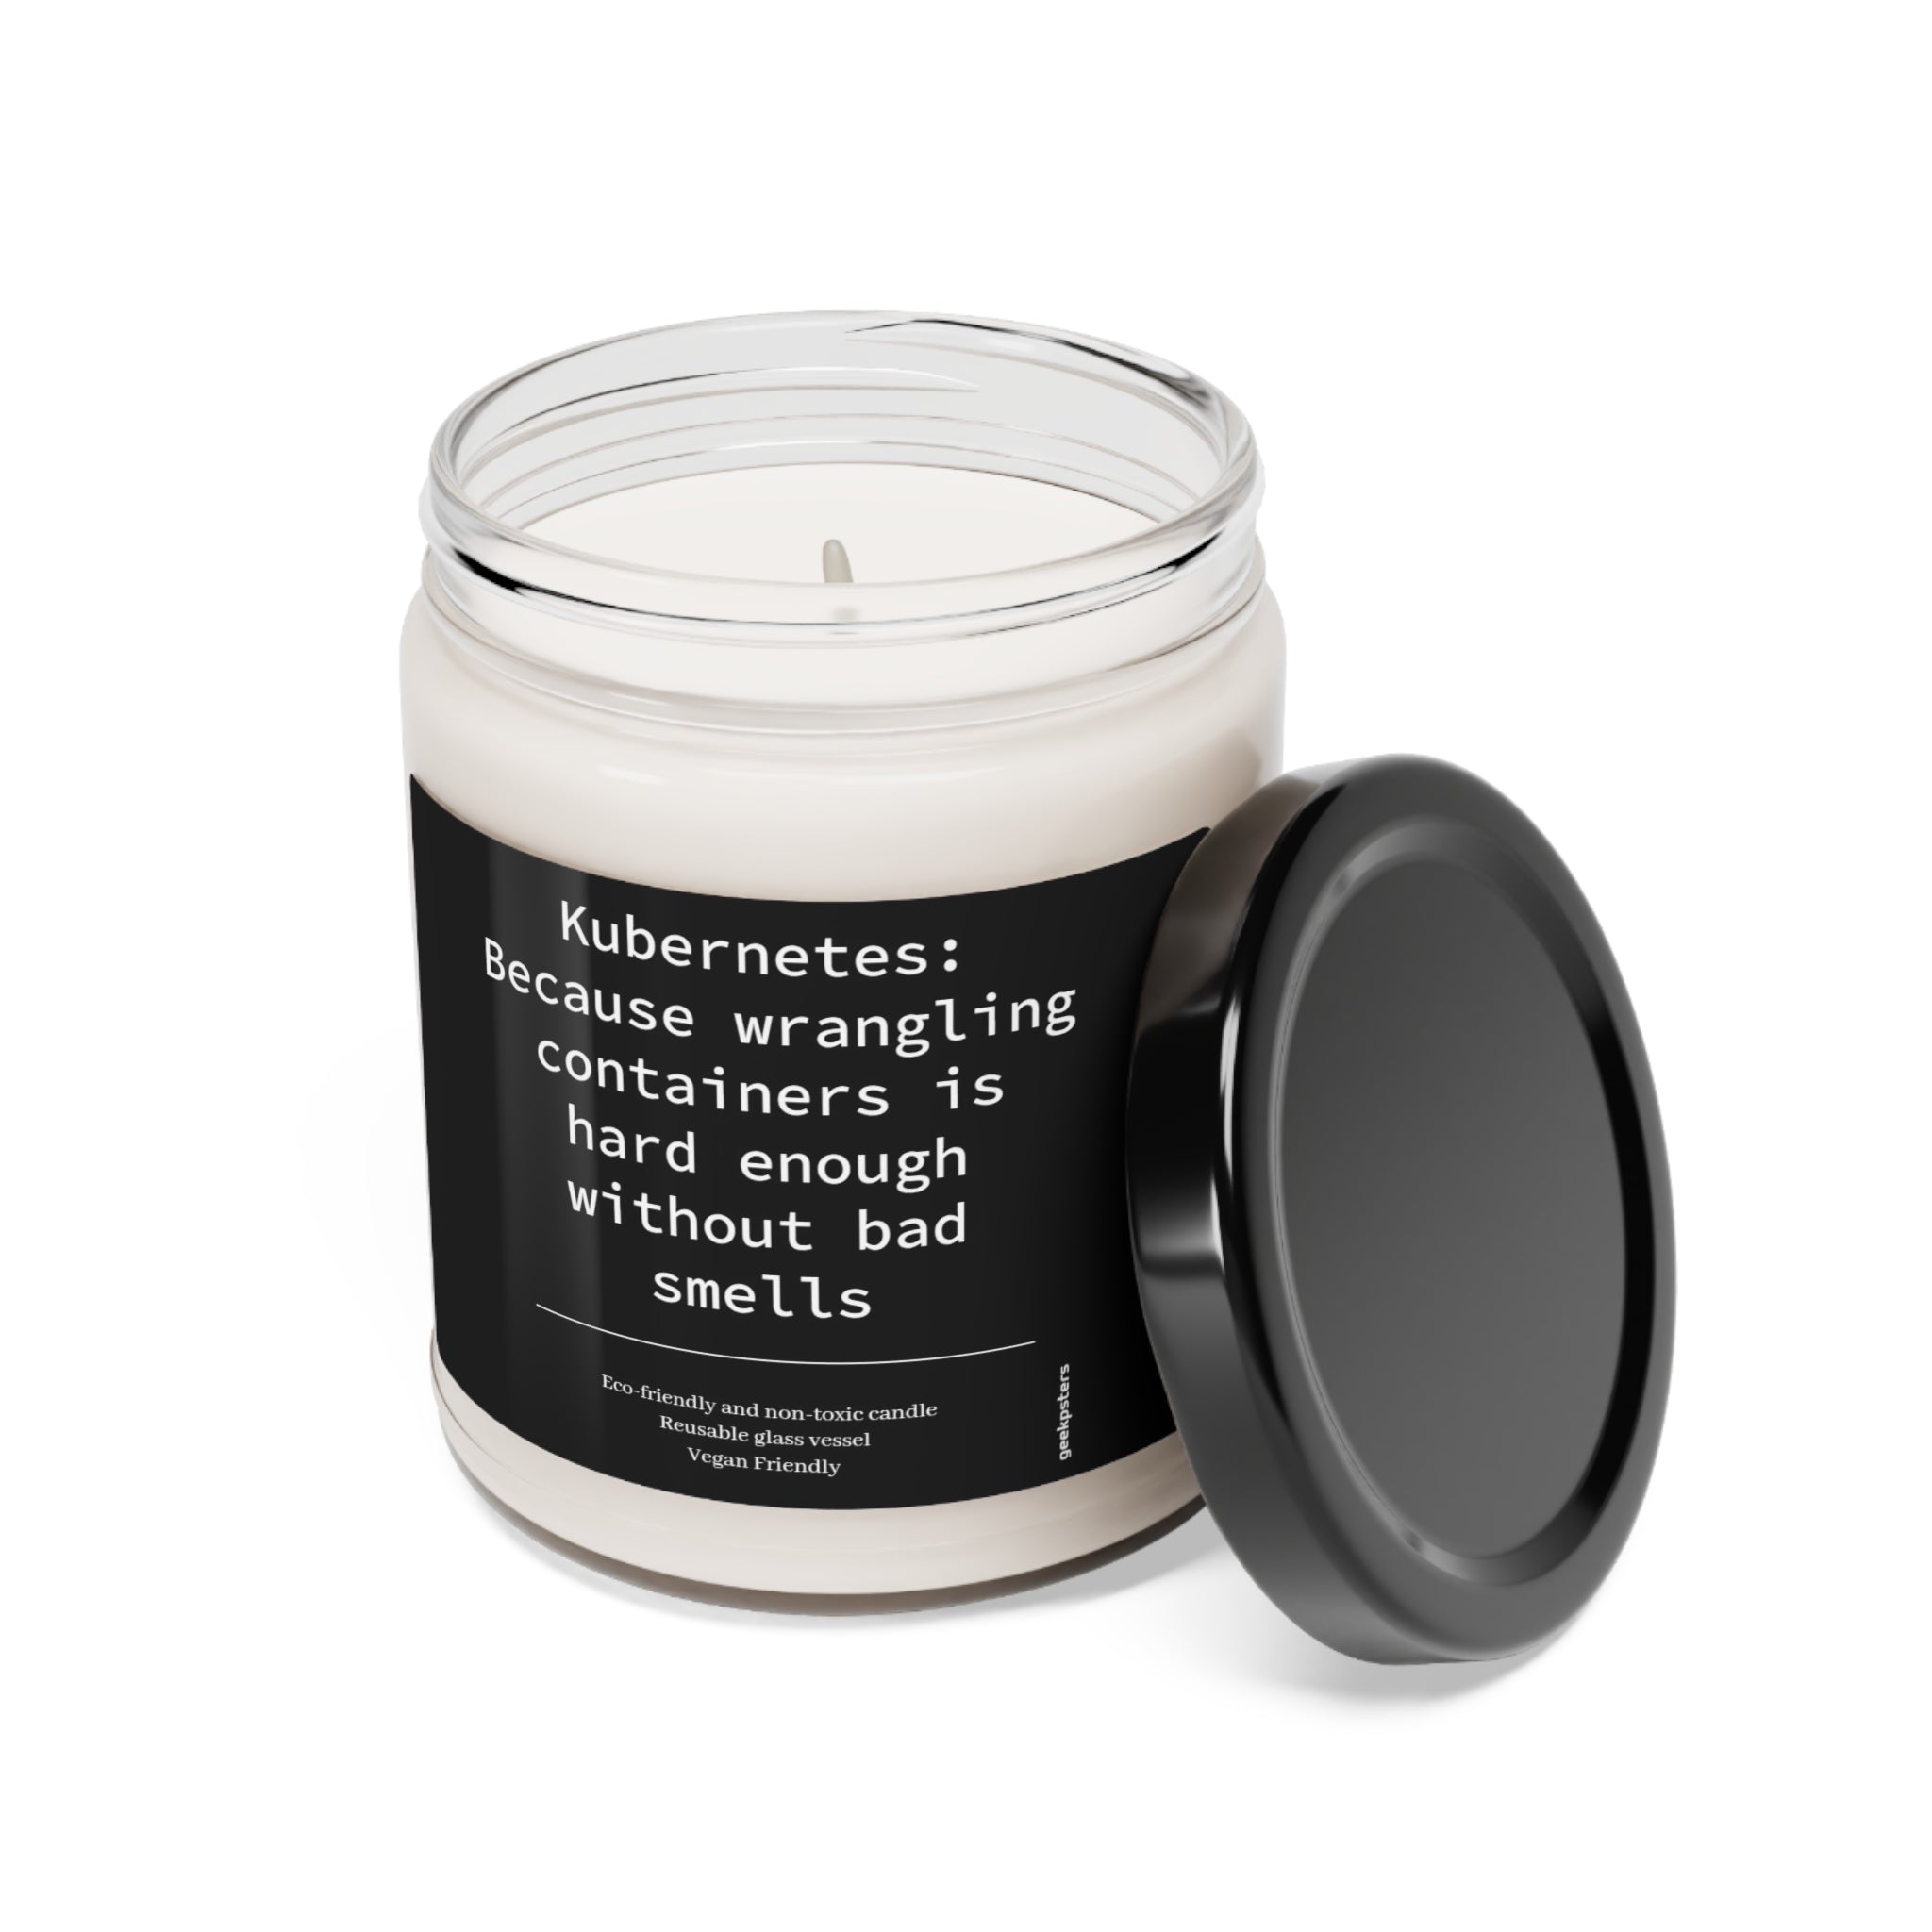 A Container Candle - Scented Soy Candle, 9oz in a glass jar with the label "kubernetes: because wrangling containers is hard enough without bad smells," including a black lid next to it.